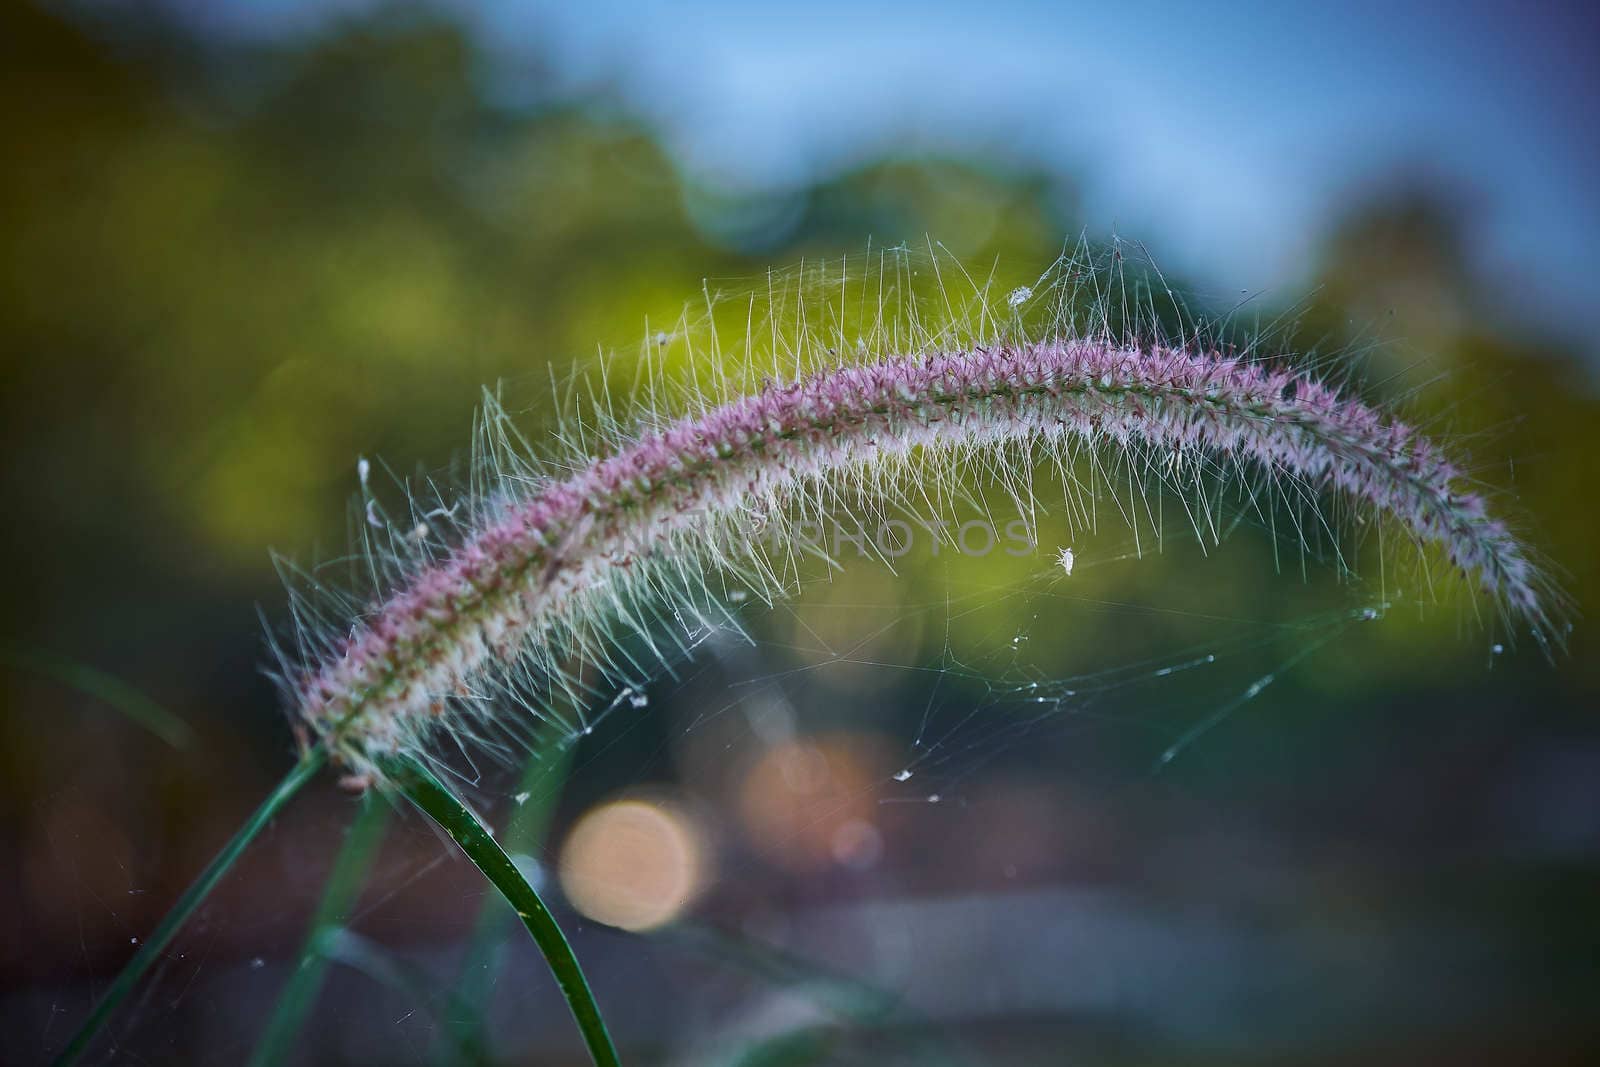 The Knotroot foxtail, slender pigeongrass, grass flowers in the morning, relaxing moments.